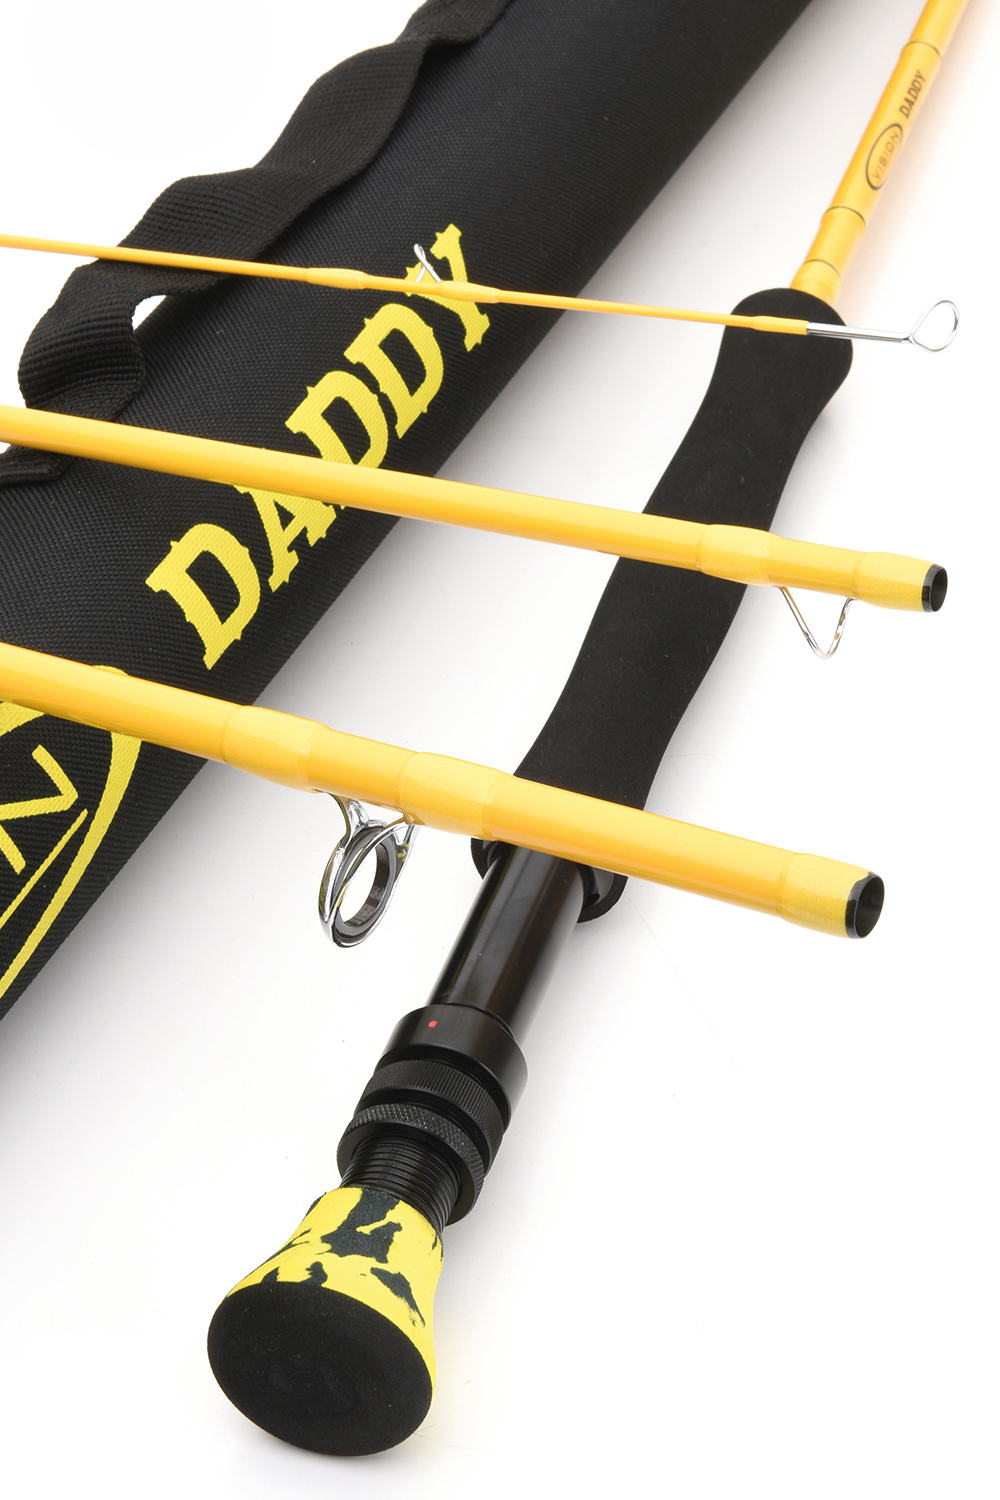 Vision - Daddy Fly Rod - 9 foot #8